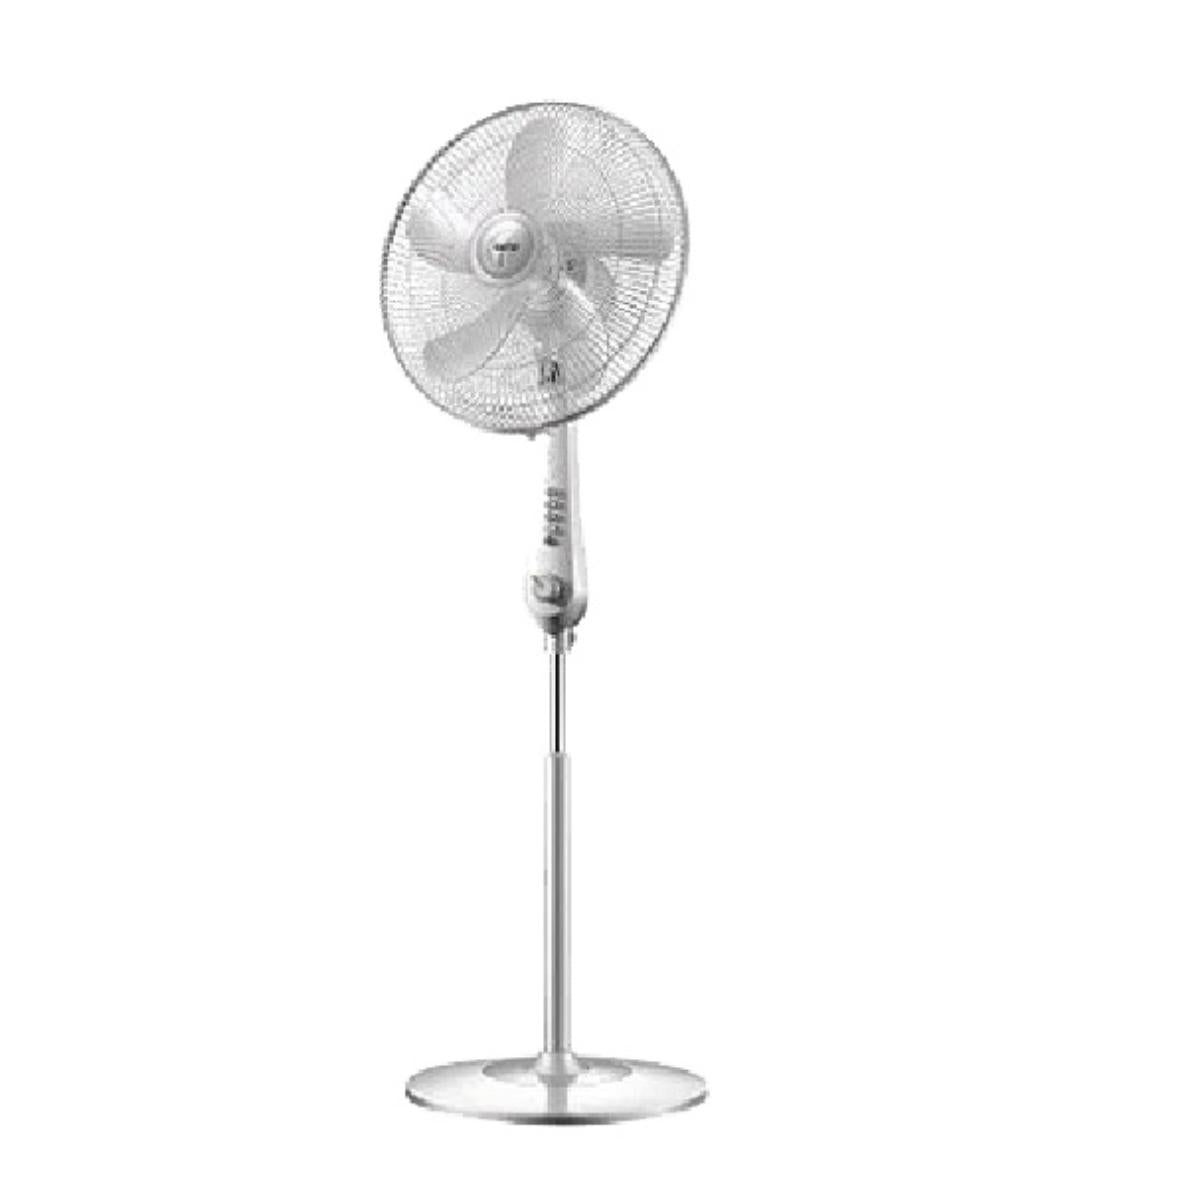 """SF-160T/SONA STAND FAN 16 """" 4 SPEED""" STAND / 16"